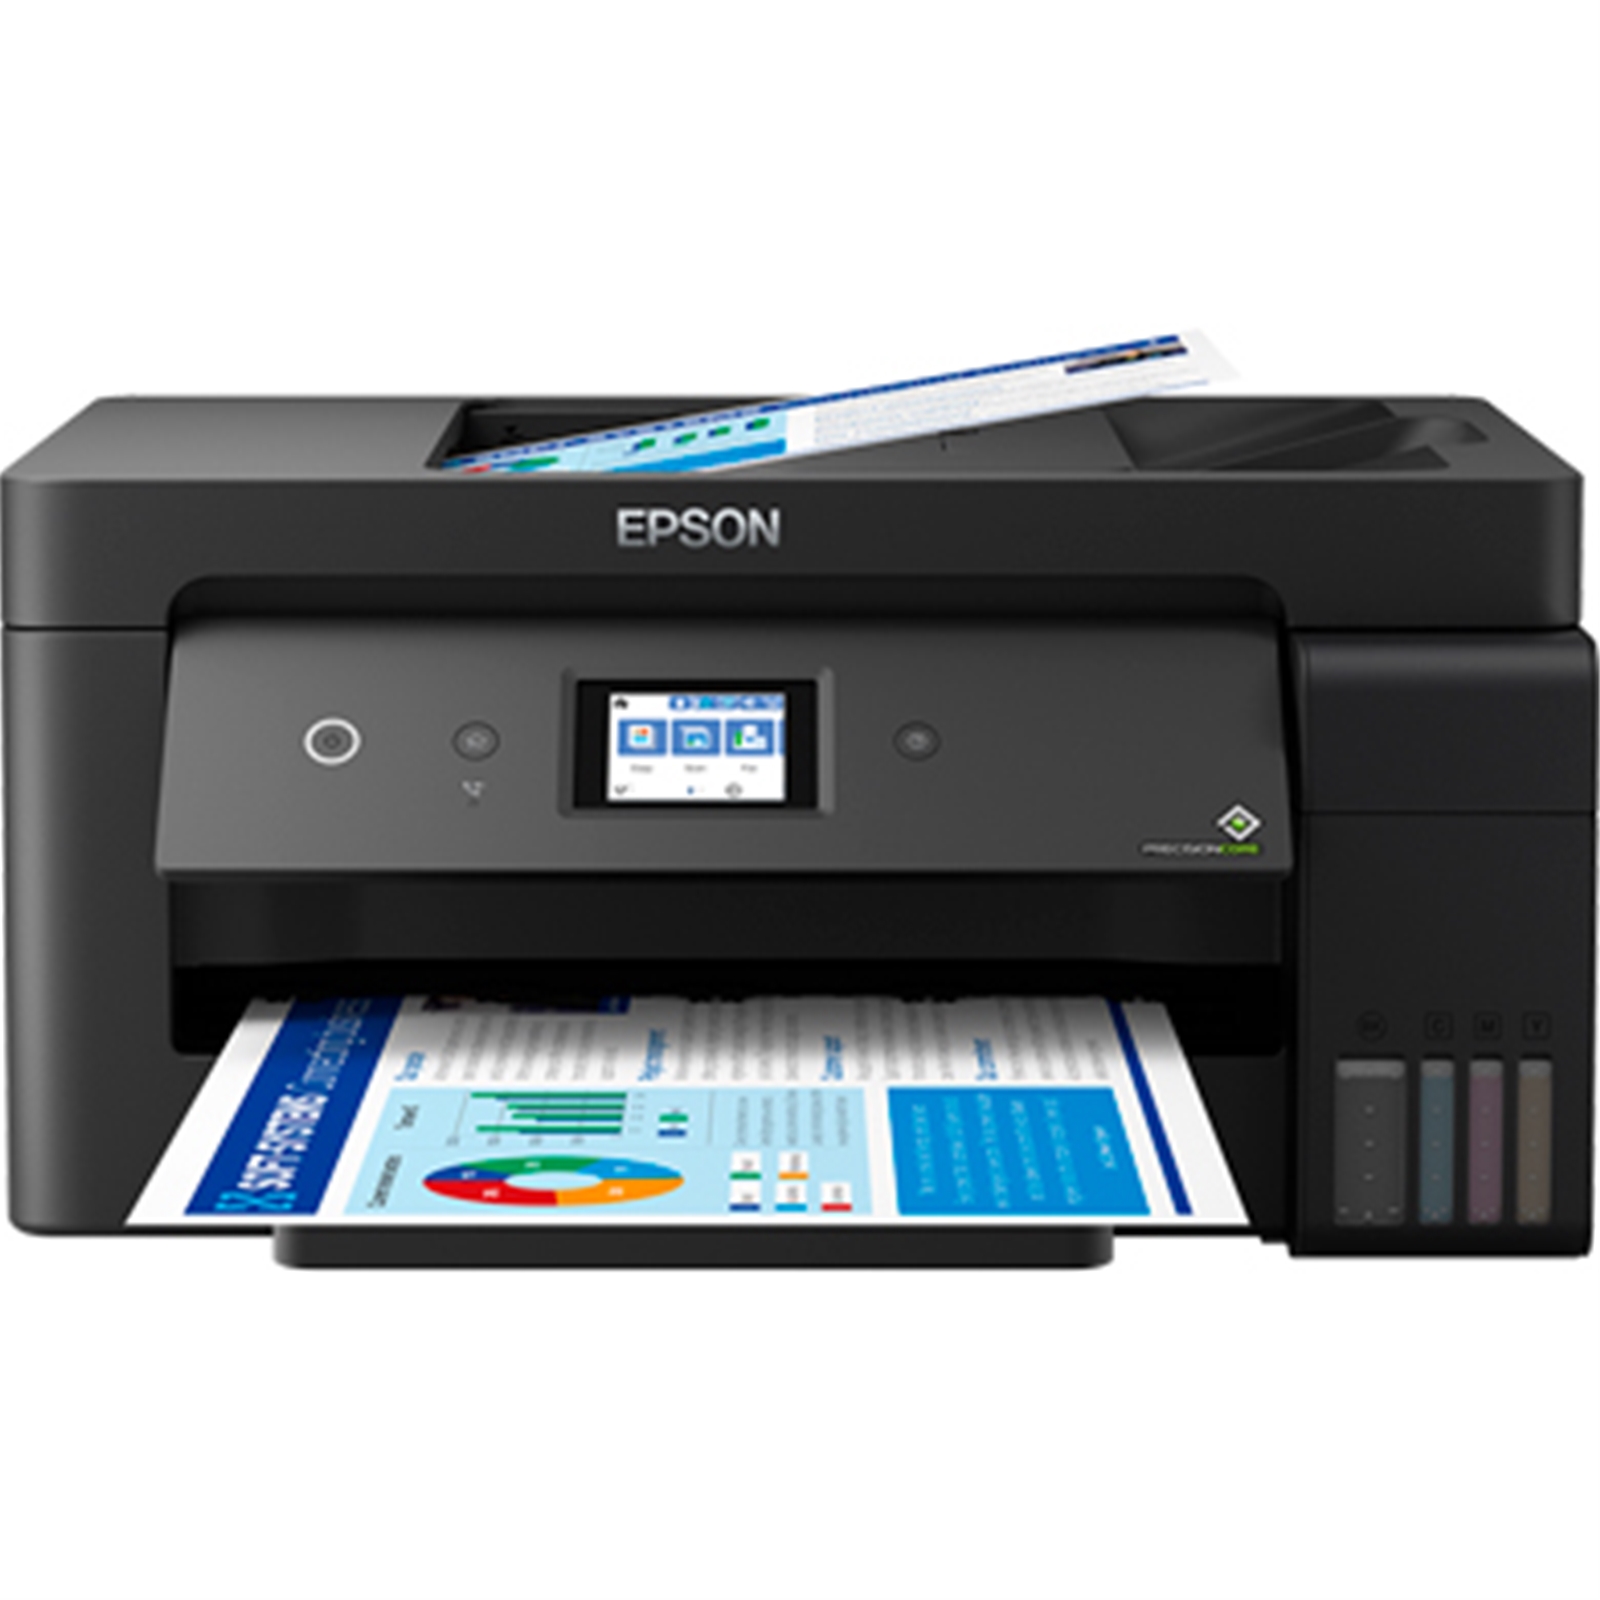 Epson Ecotank ET-15000 C11CH96401CA Printer,  Colour, Wireless, A3, All-in-One inc Fax, Network, ADF, 6.8cm Touchscreen Panel